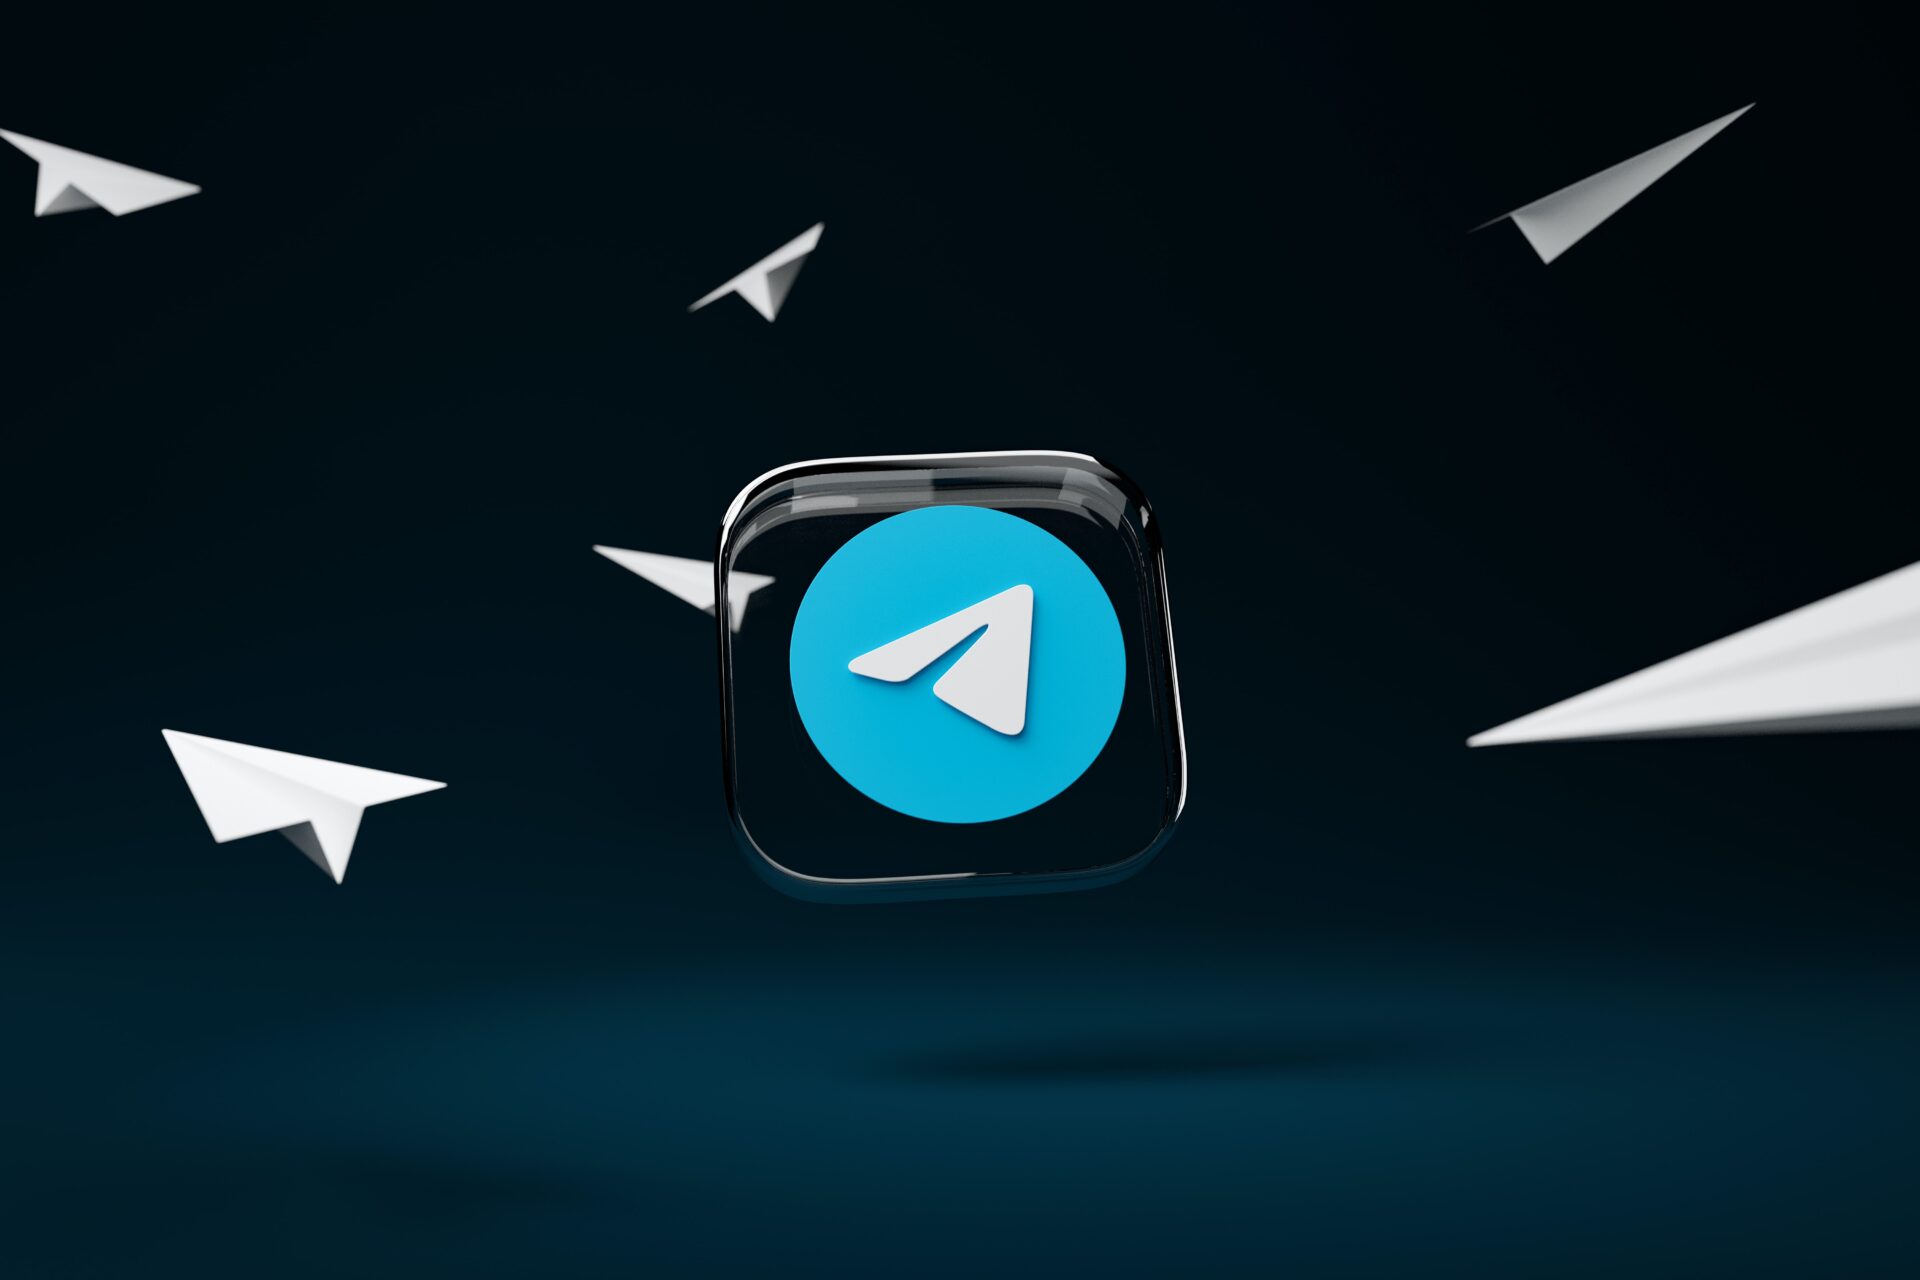 Telegram Application Icon in a black background, the paper plane flying through in the image represents Telegram app users